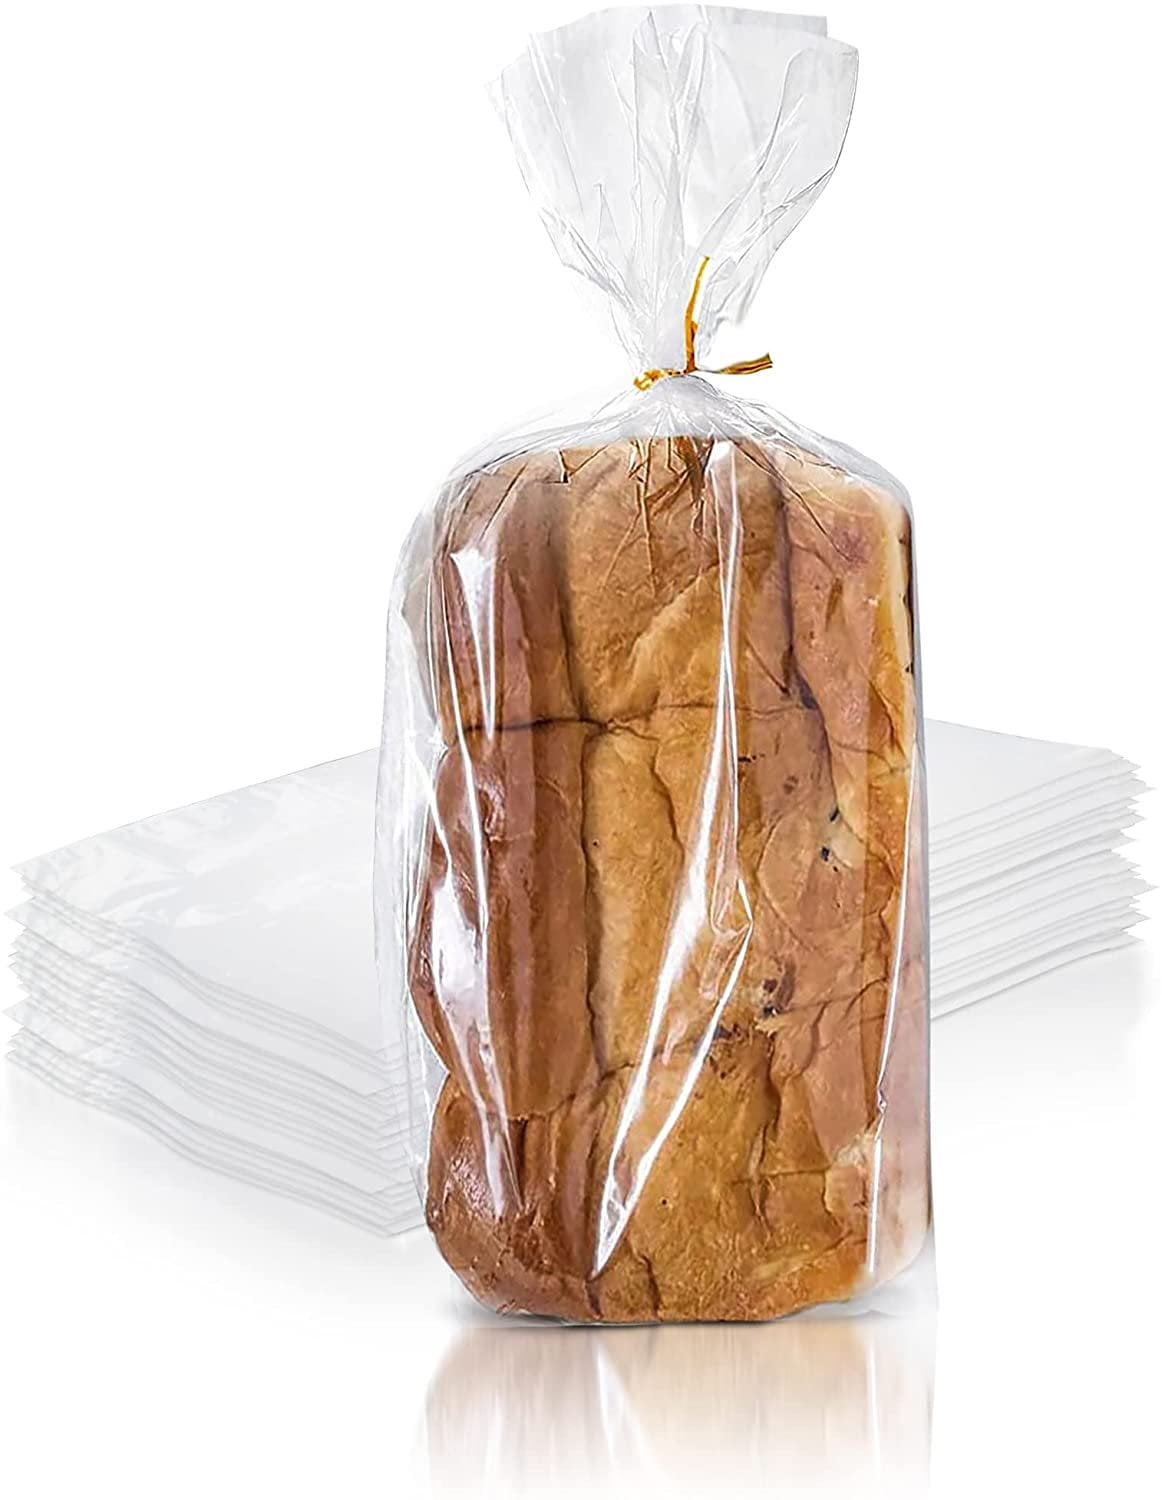 Purevacy Poly Bakery Bread Bags 5.5 x 4.75 x 19. Pack of 1000 Bread Loaf Packing Bags 5 1/2 x 4 3/4 x 19 Ultra Thin Polyethylene Bags 1 Mil Thick Poly